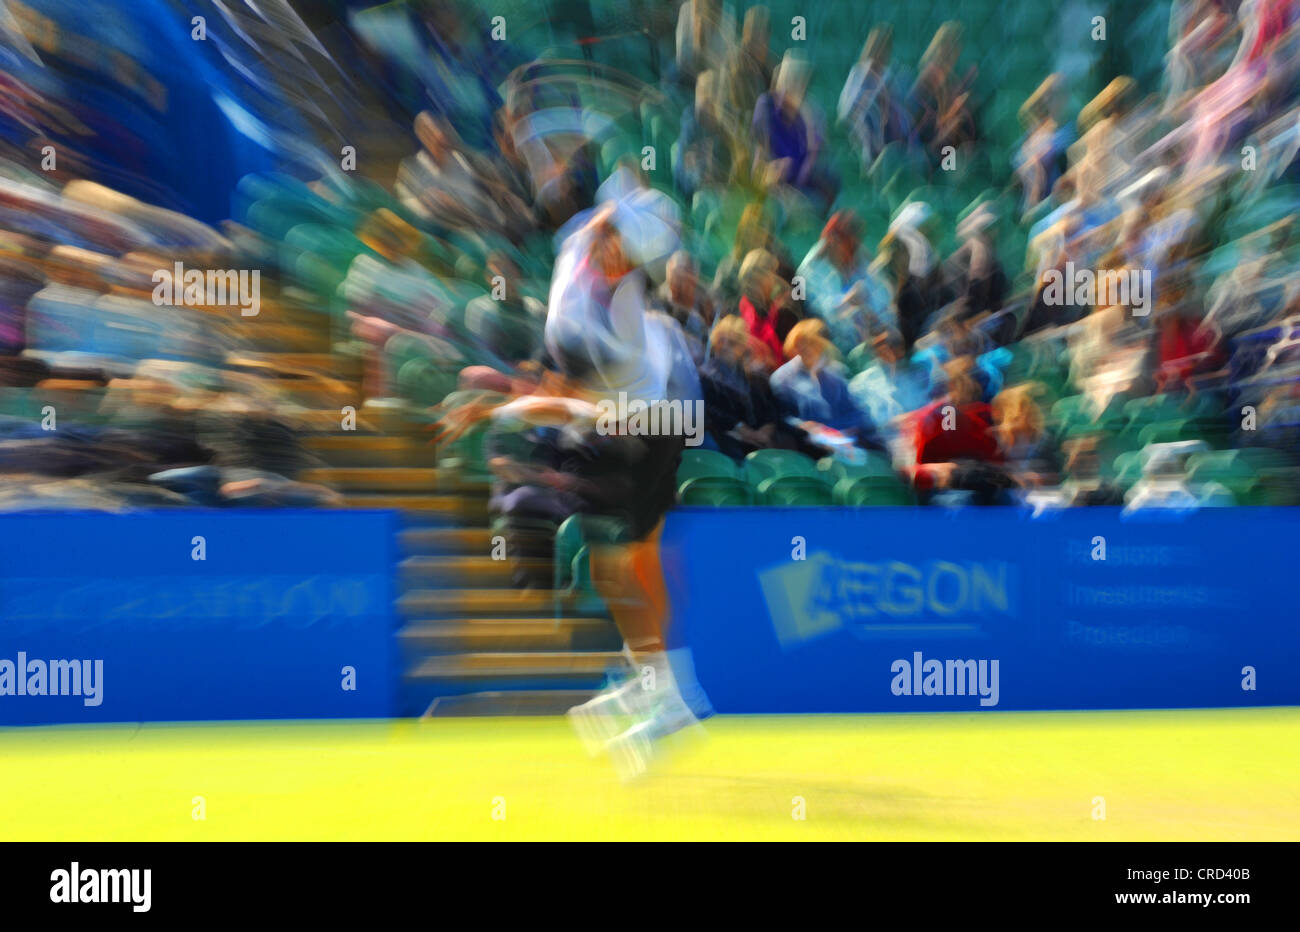 Blur effect image of male tennis player in action at Devonshire Park Eastbourne for the Aegon International Tournament Sussex UK Stock Photo